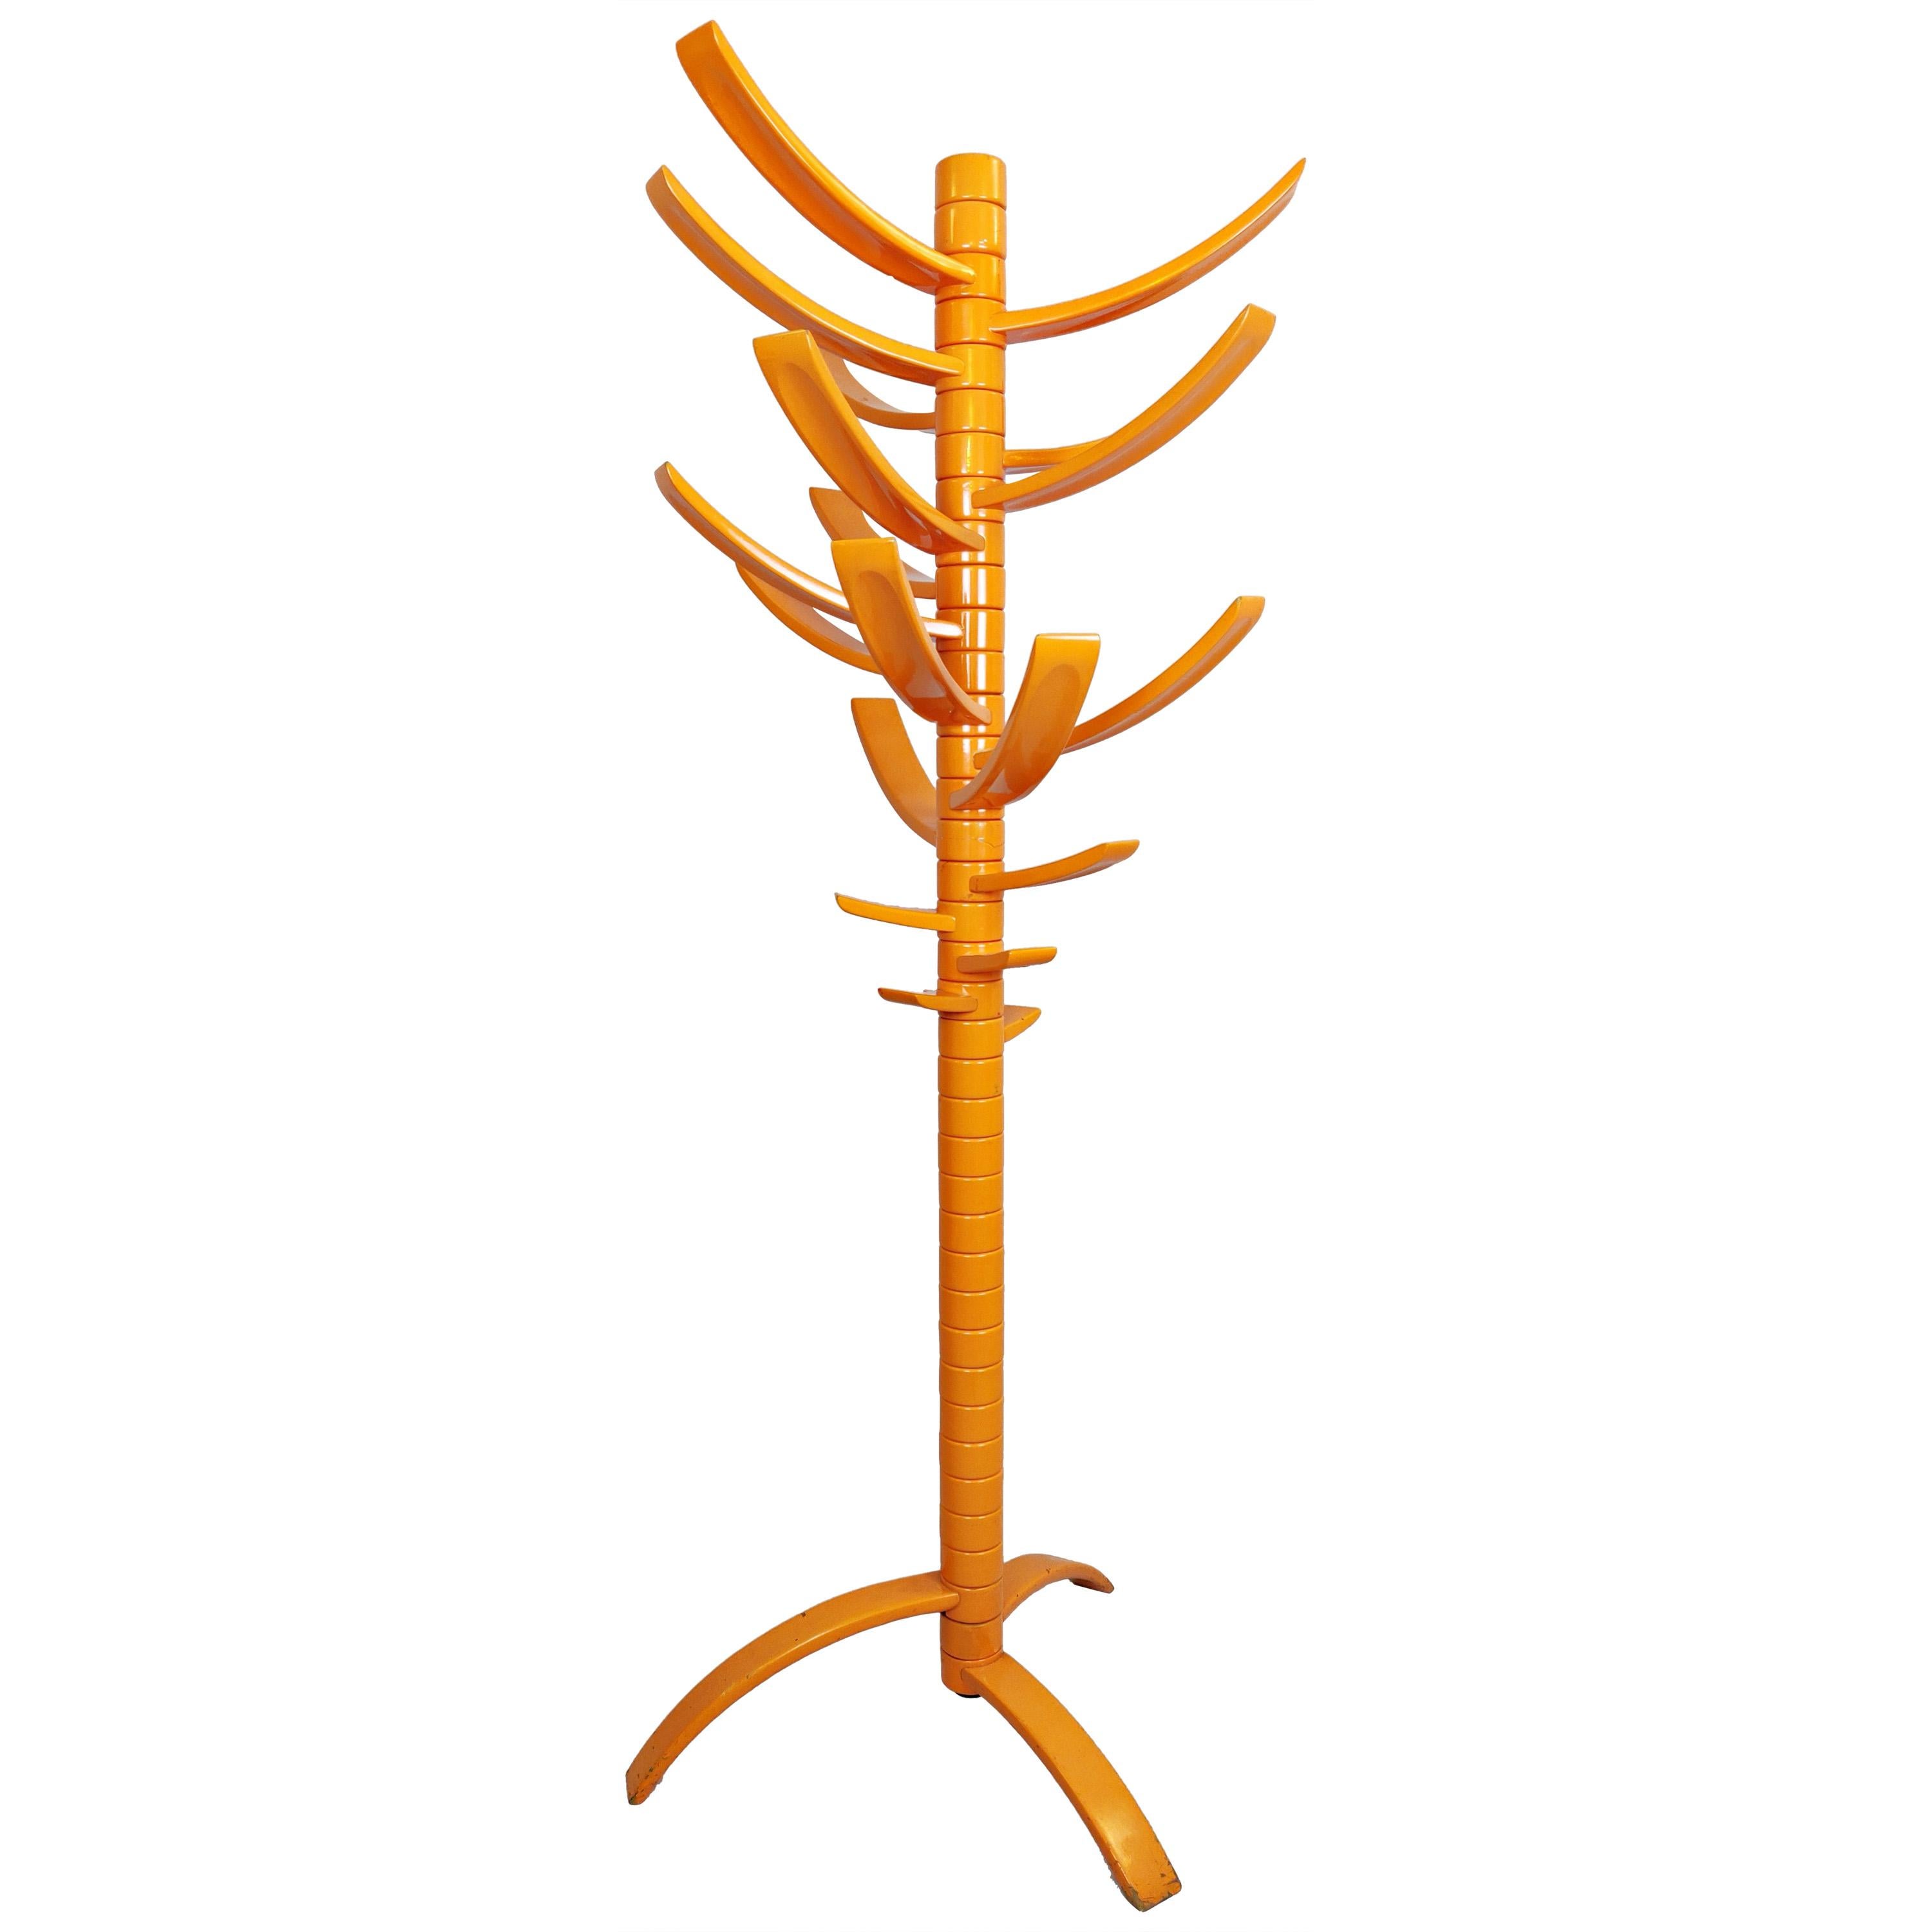 Sculptural Orange Lacquered Wood Coat Rack by Bruce Tippett Renna